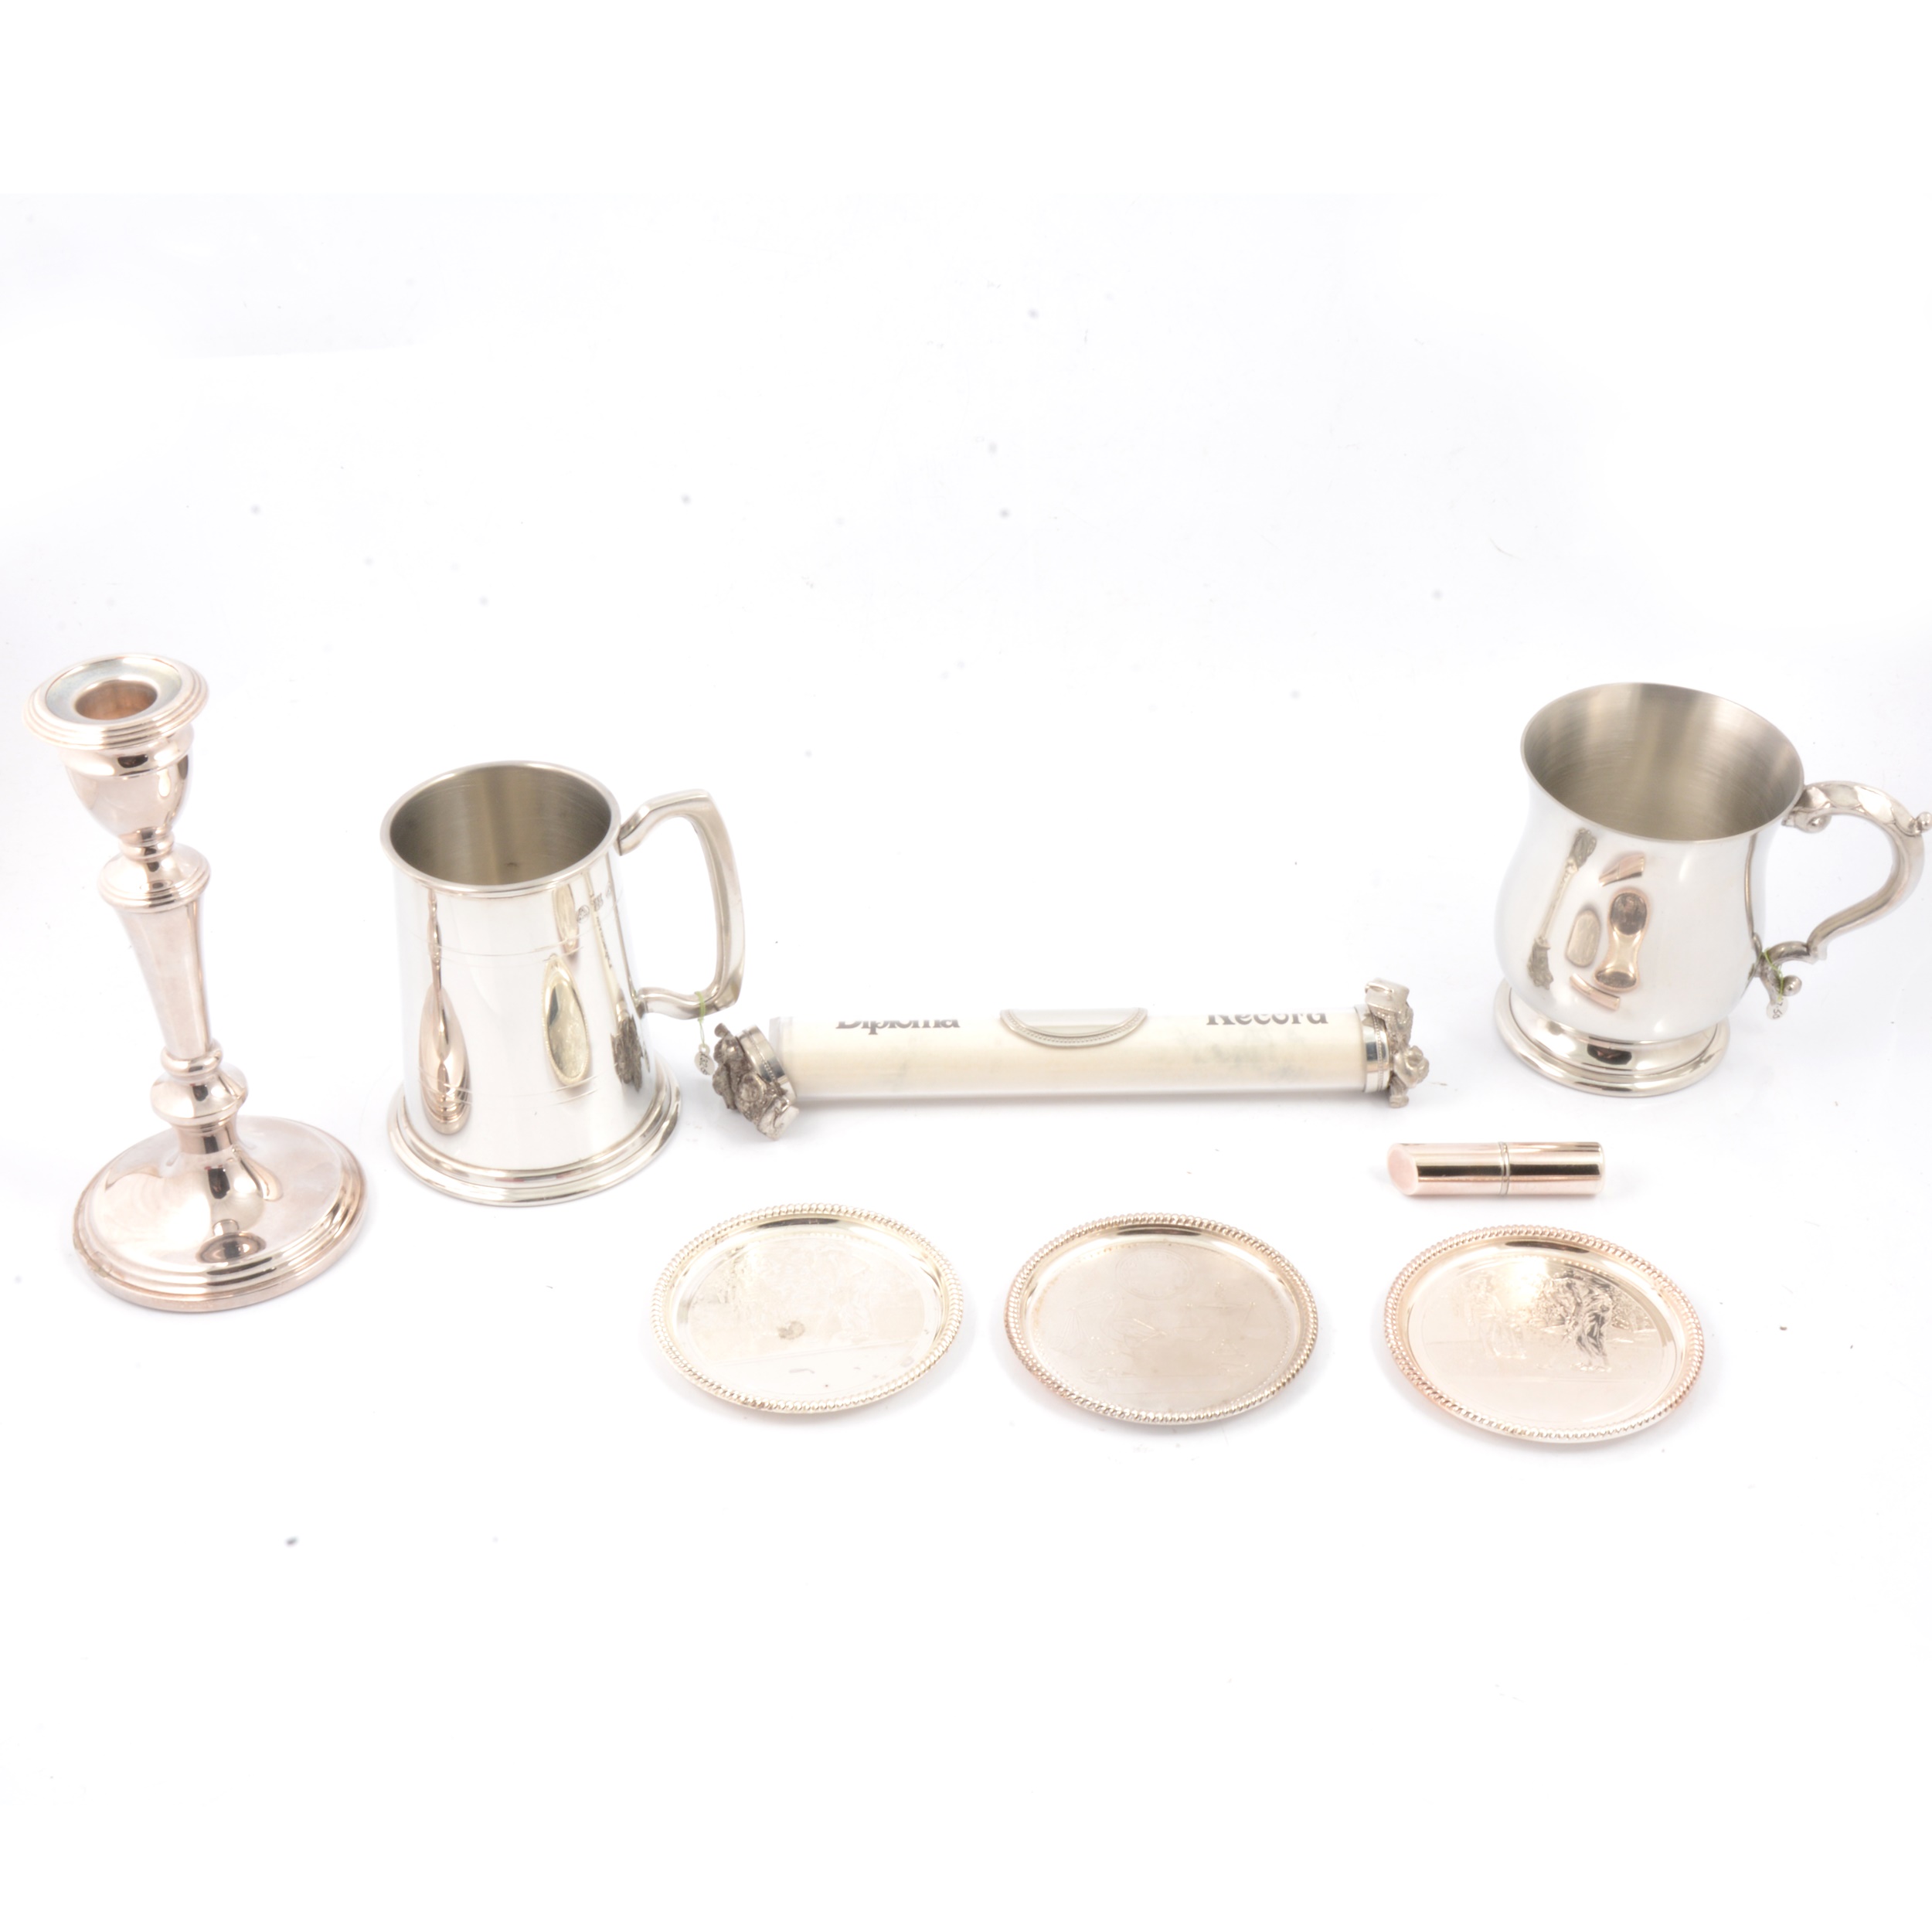 Silver-plated gift items.